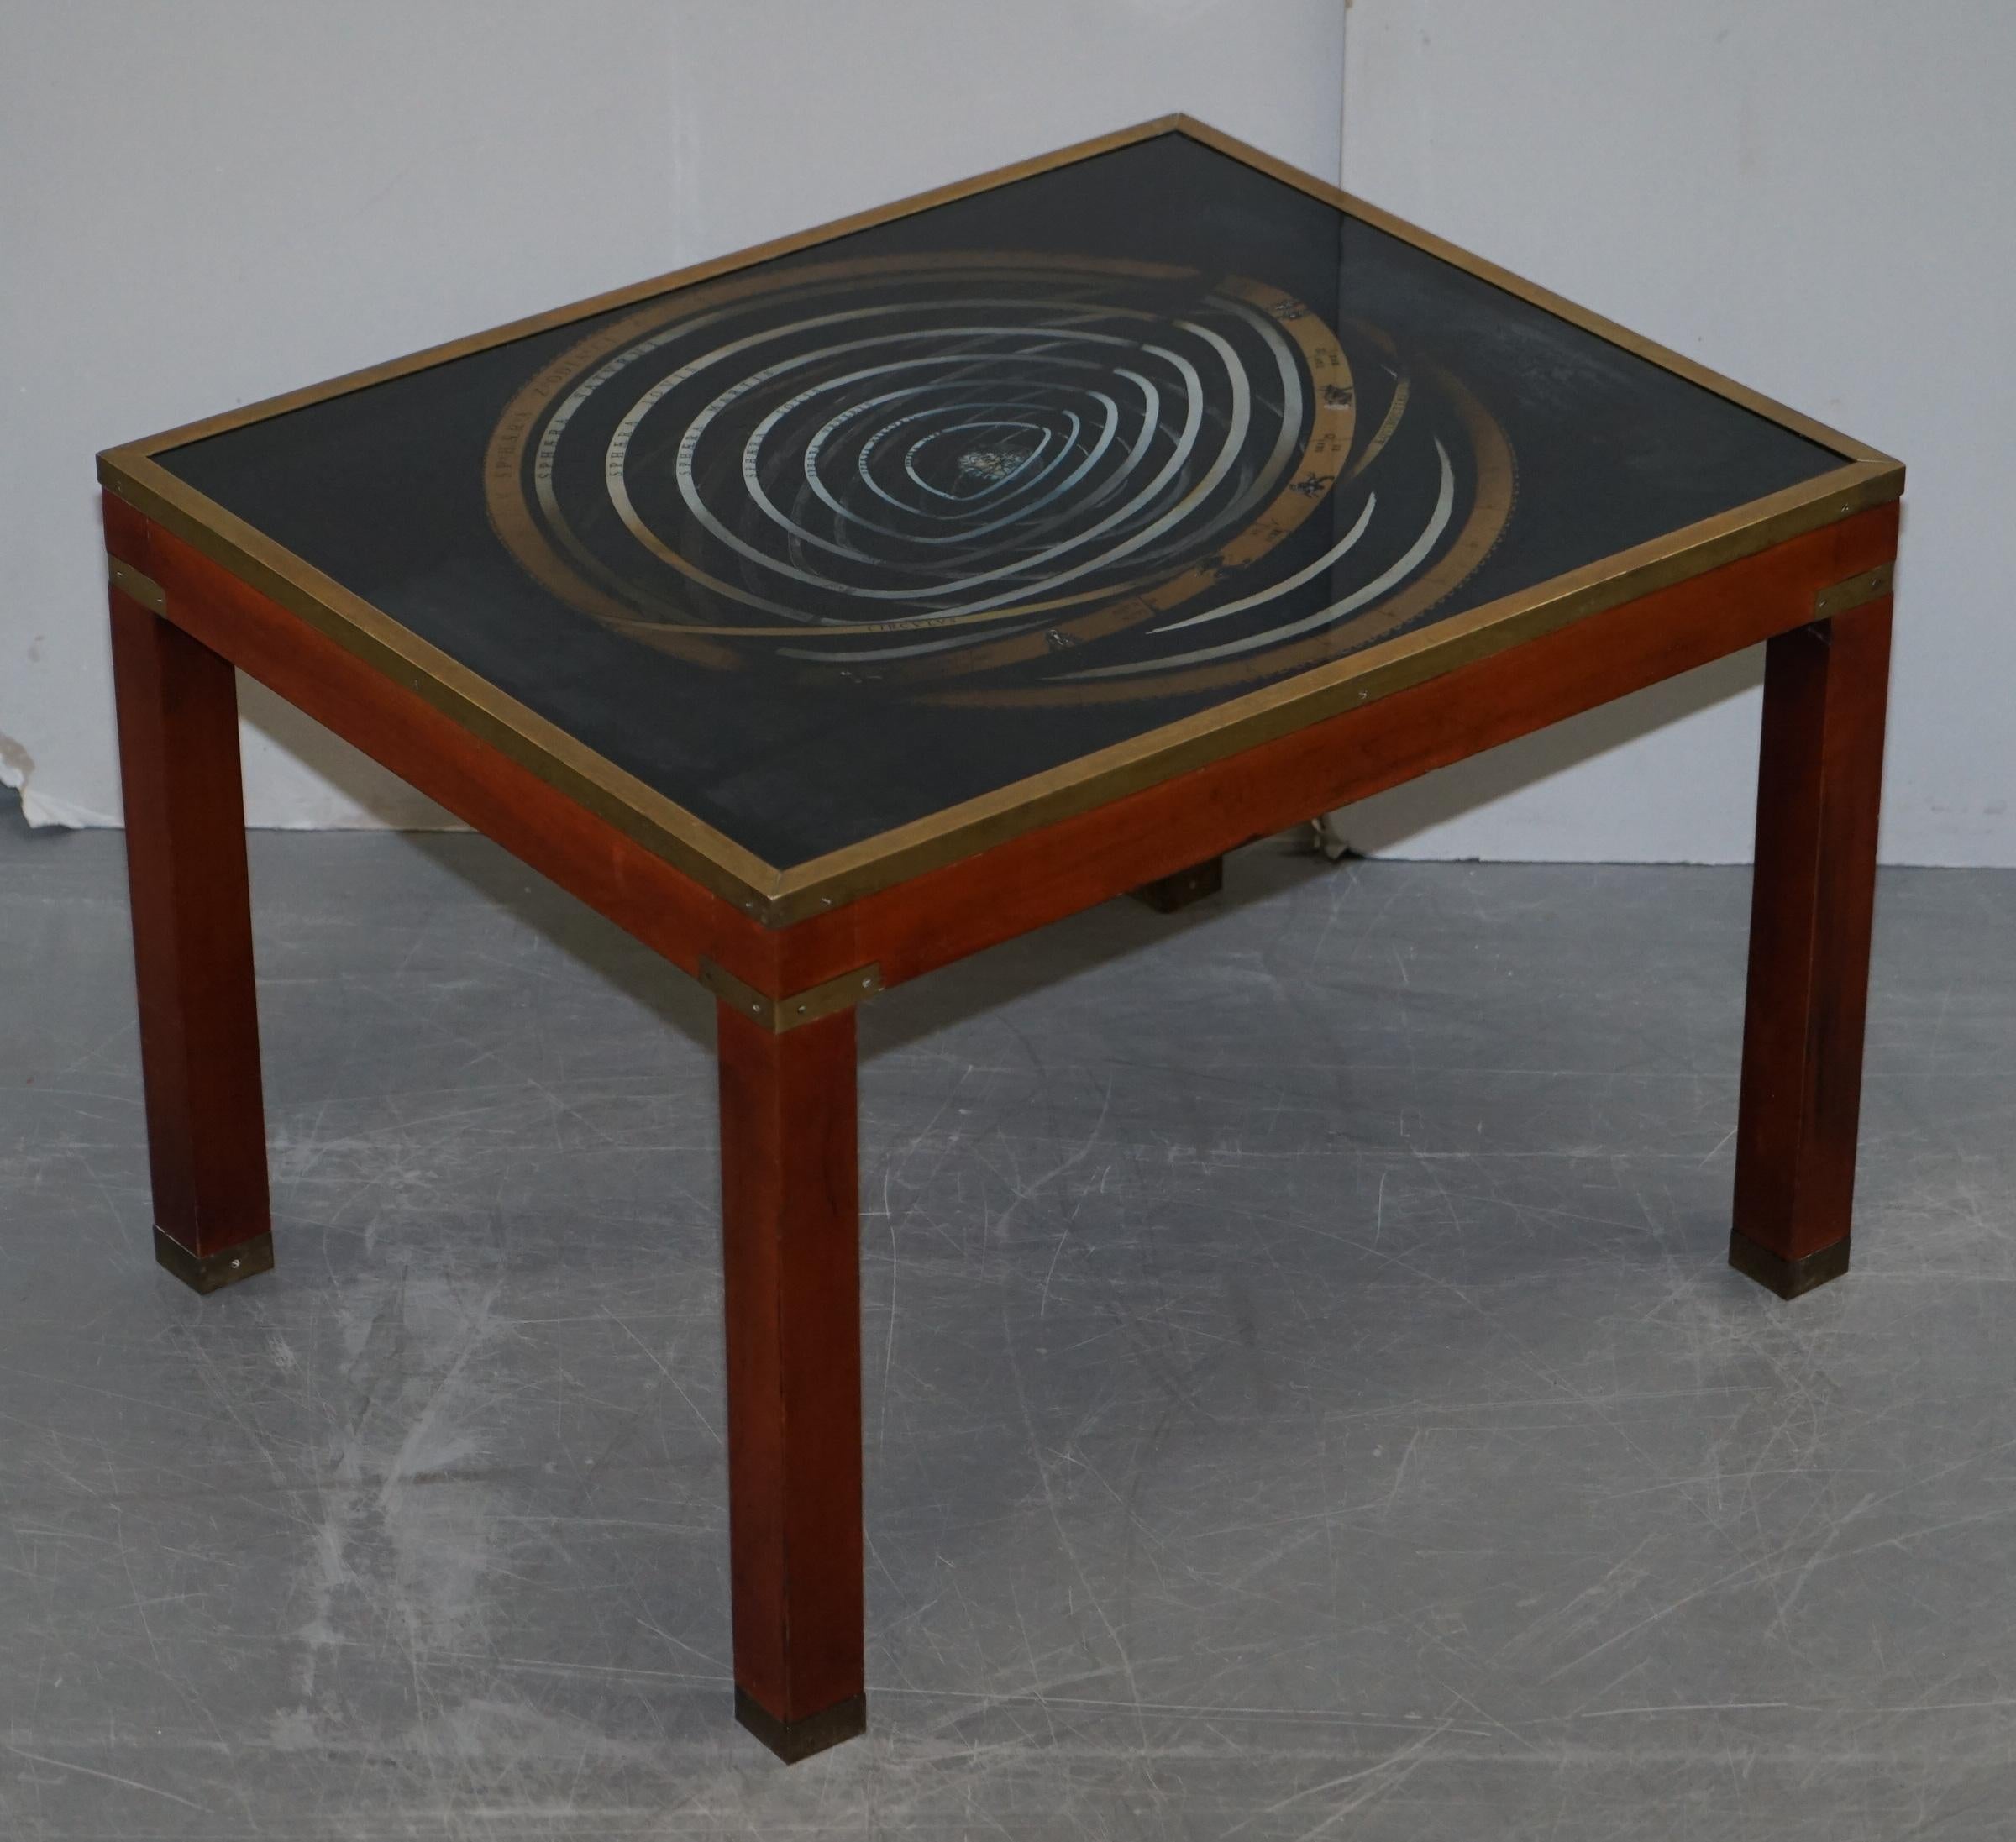 We are delighted to offer for sale this lovely very large nest of three side tables with rare Zodiac Astrology maps 

A nice decorative set, each one has a good quality prints of the zodiac. The tables are made in the military campaign style so